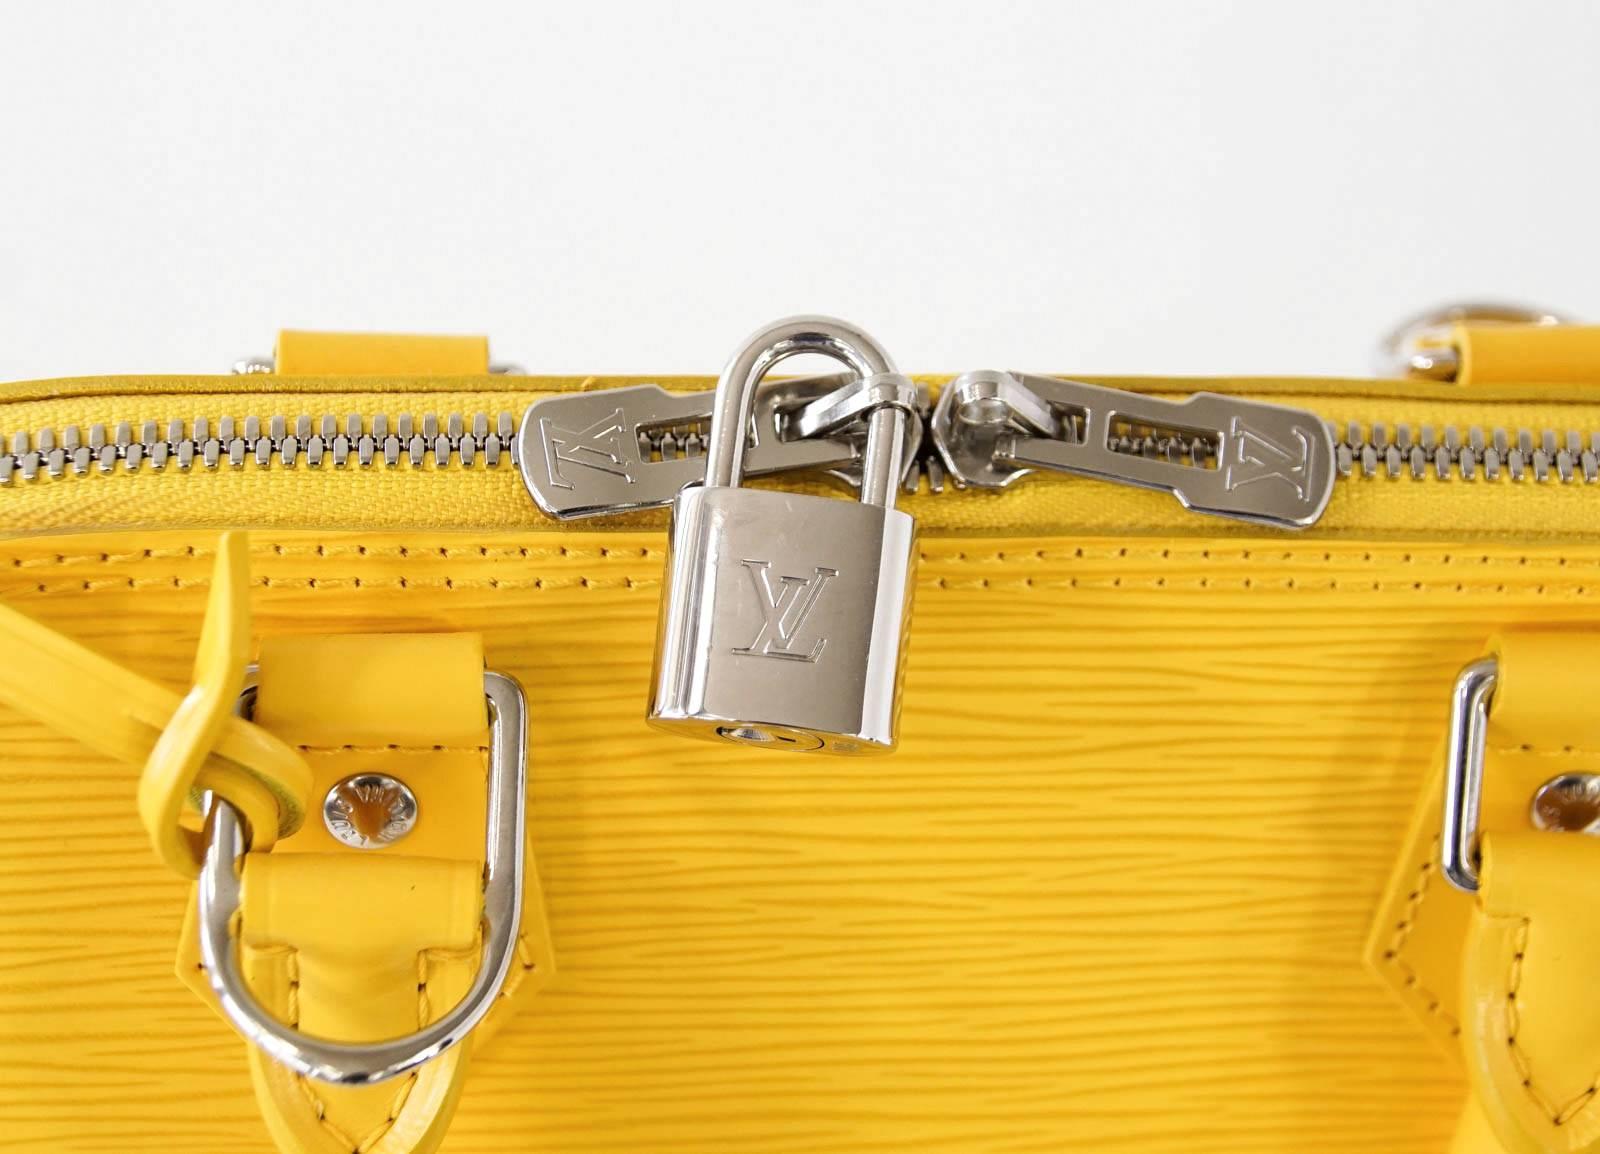 Guaranteed authentic LOUIS VUITTON classic Alma in vivid citron yellow
Silver hardware.
Top double zip with logo embossed pull.
Includes embossed lock and clochette with key.
Interior lined in yellow suede with slot pocket and cutout for cell